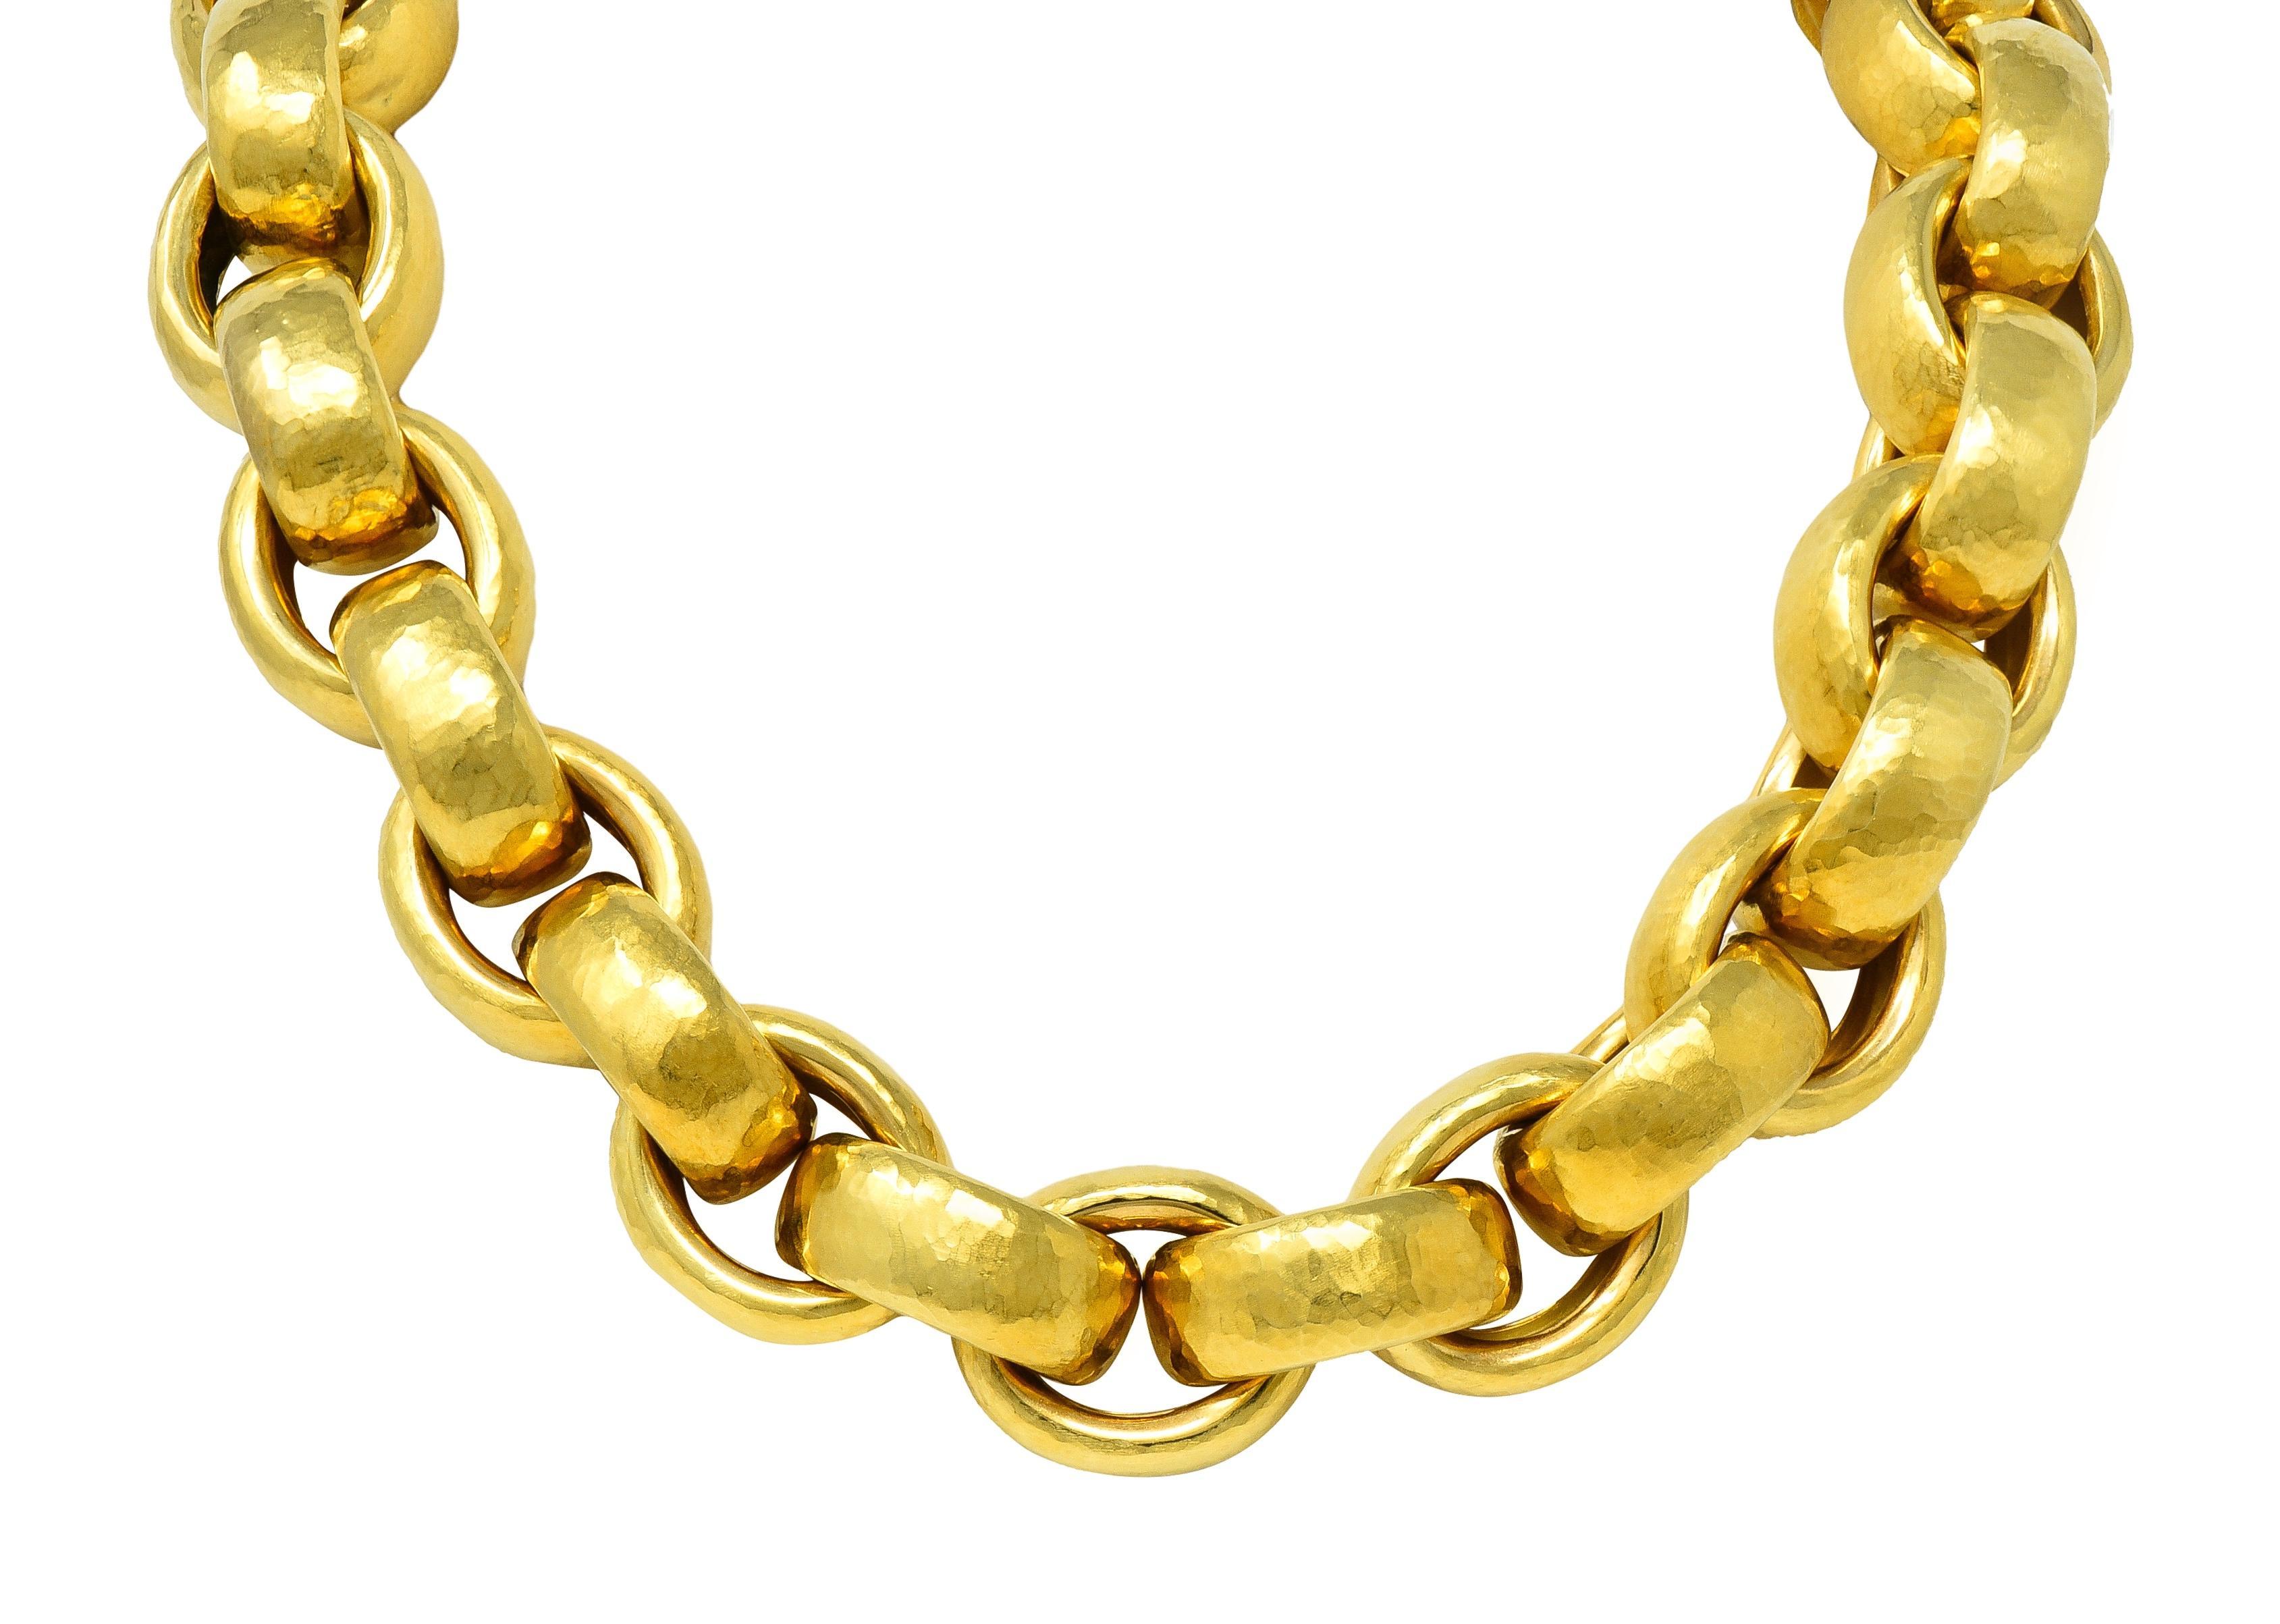 1989 Paloma Picasso Tiffany & Co. 18 Karat Yellow Gold Hammered Link Necklace For Sale 3